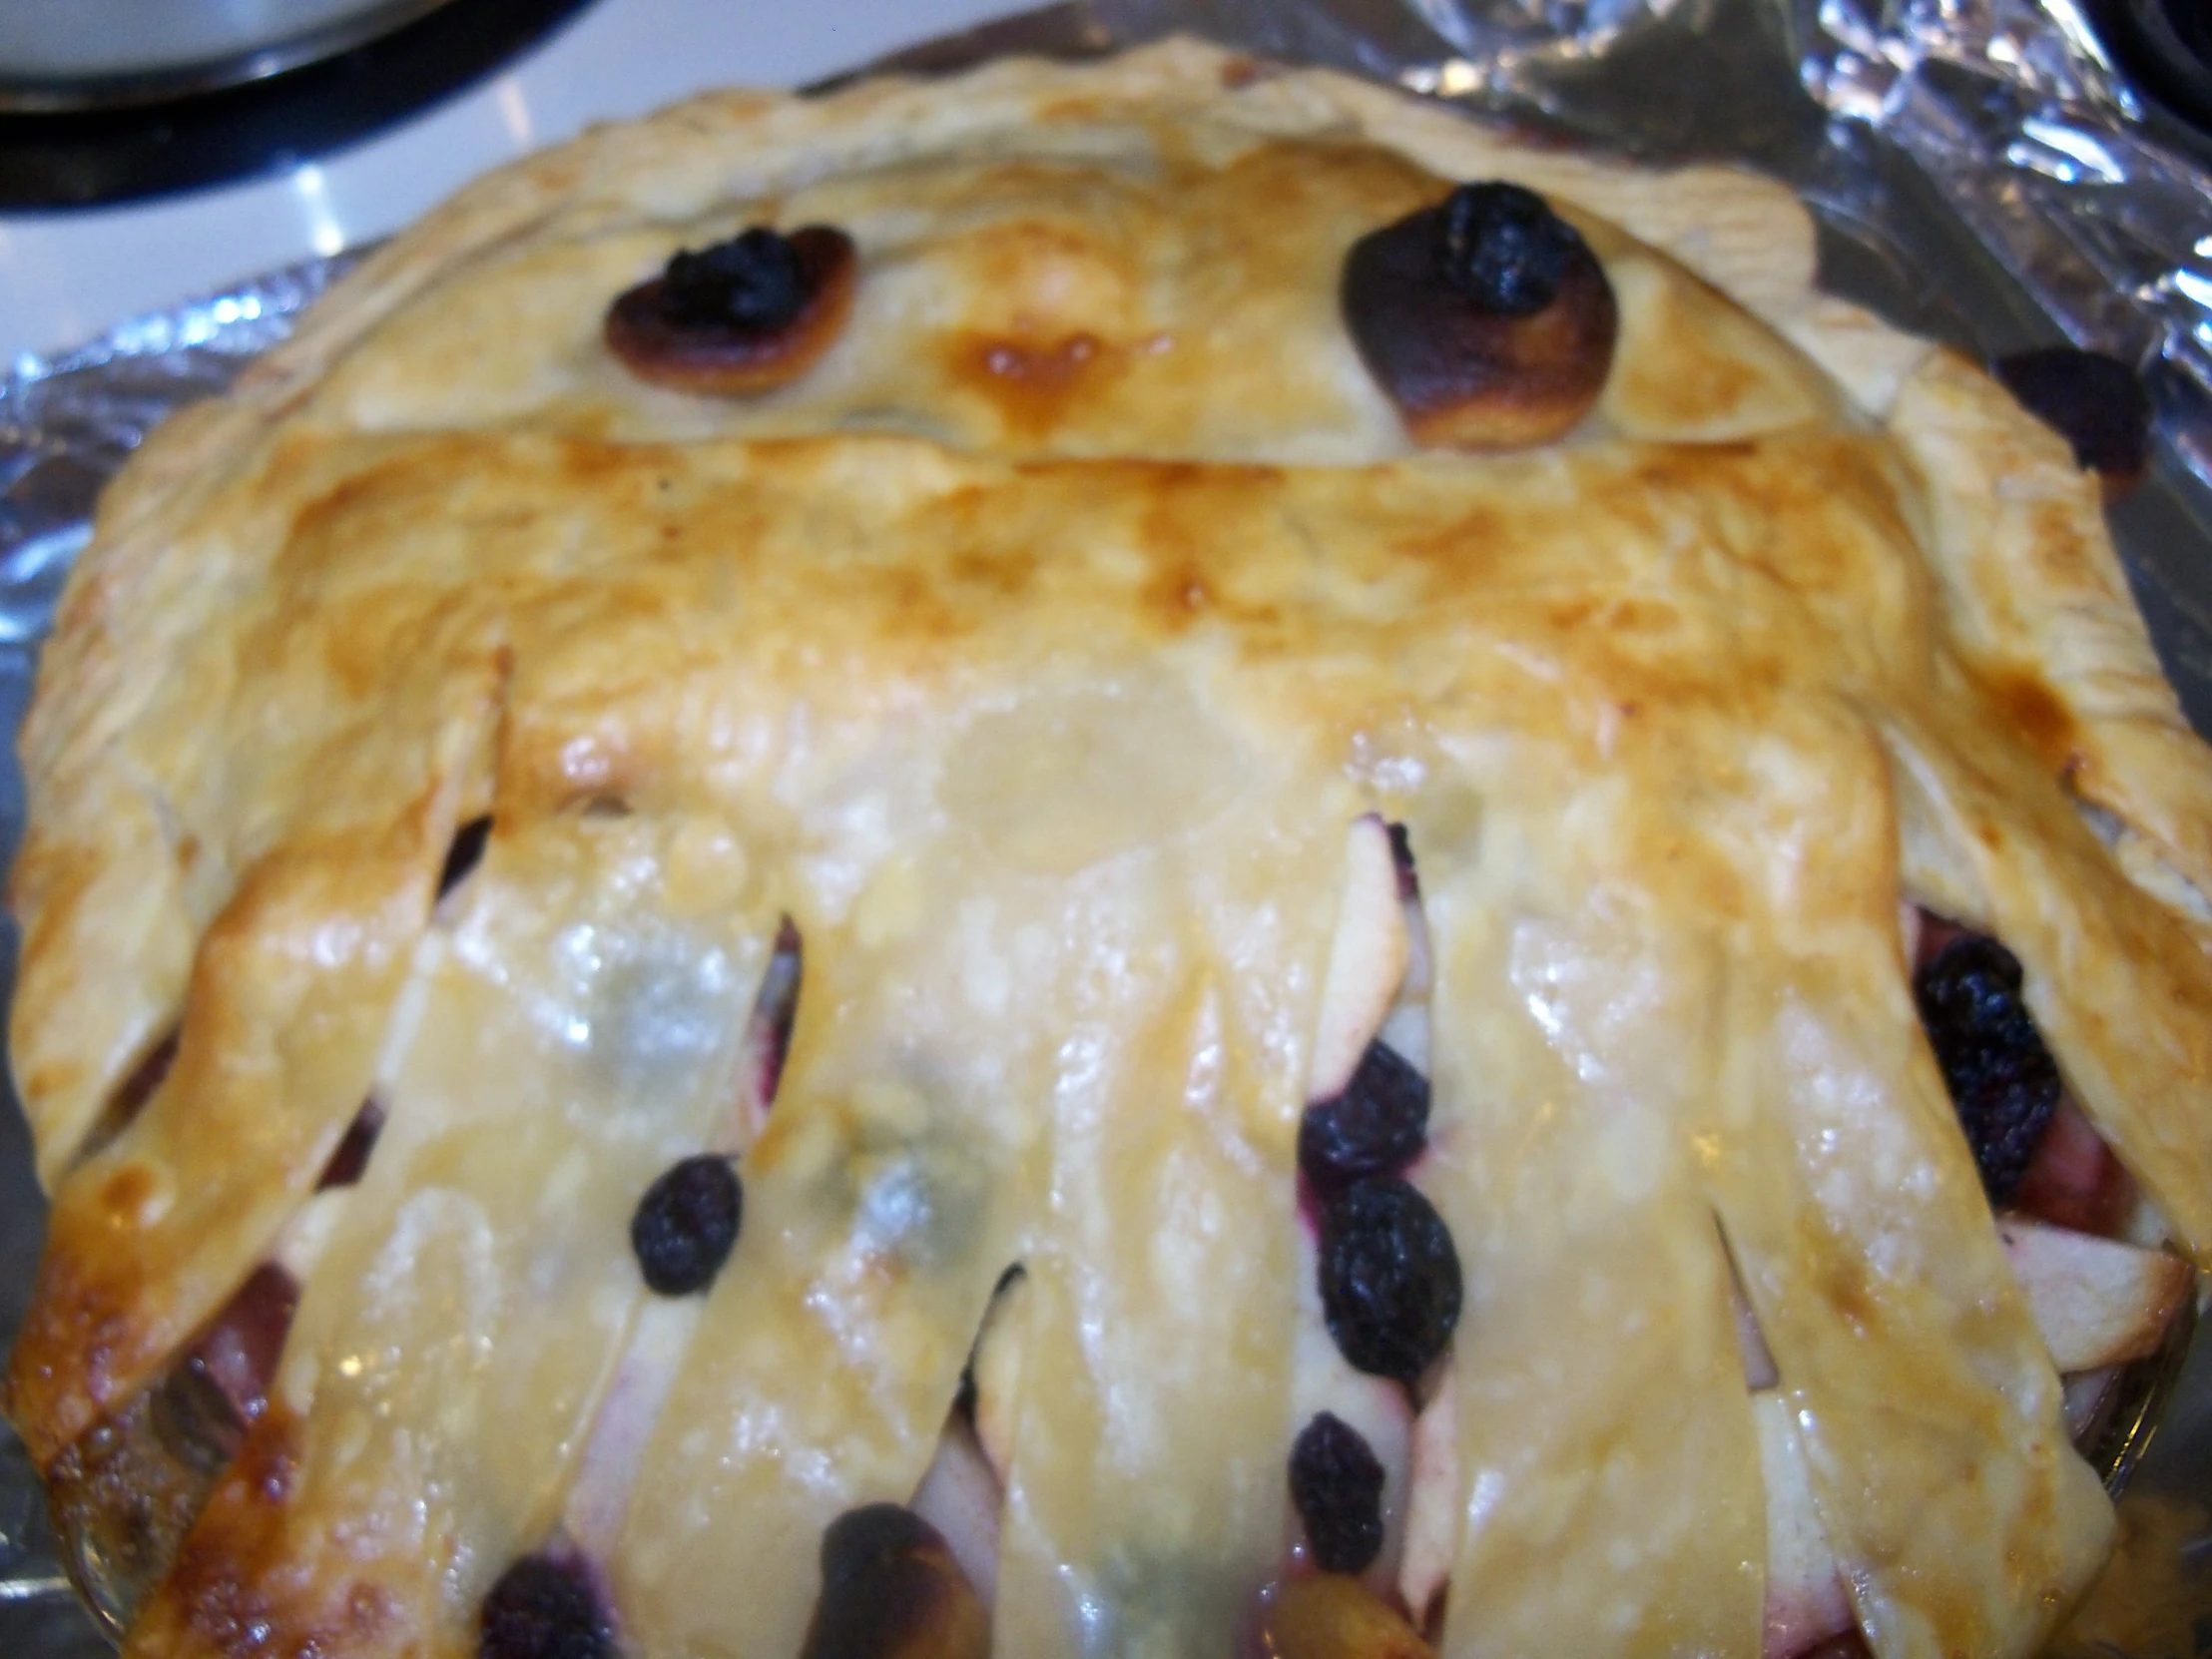 a baked dessert with blueberries and ham